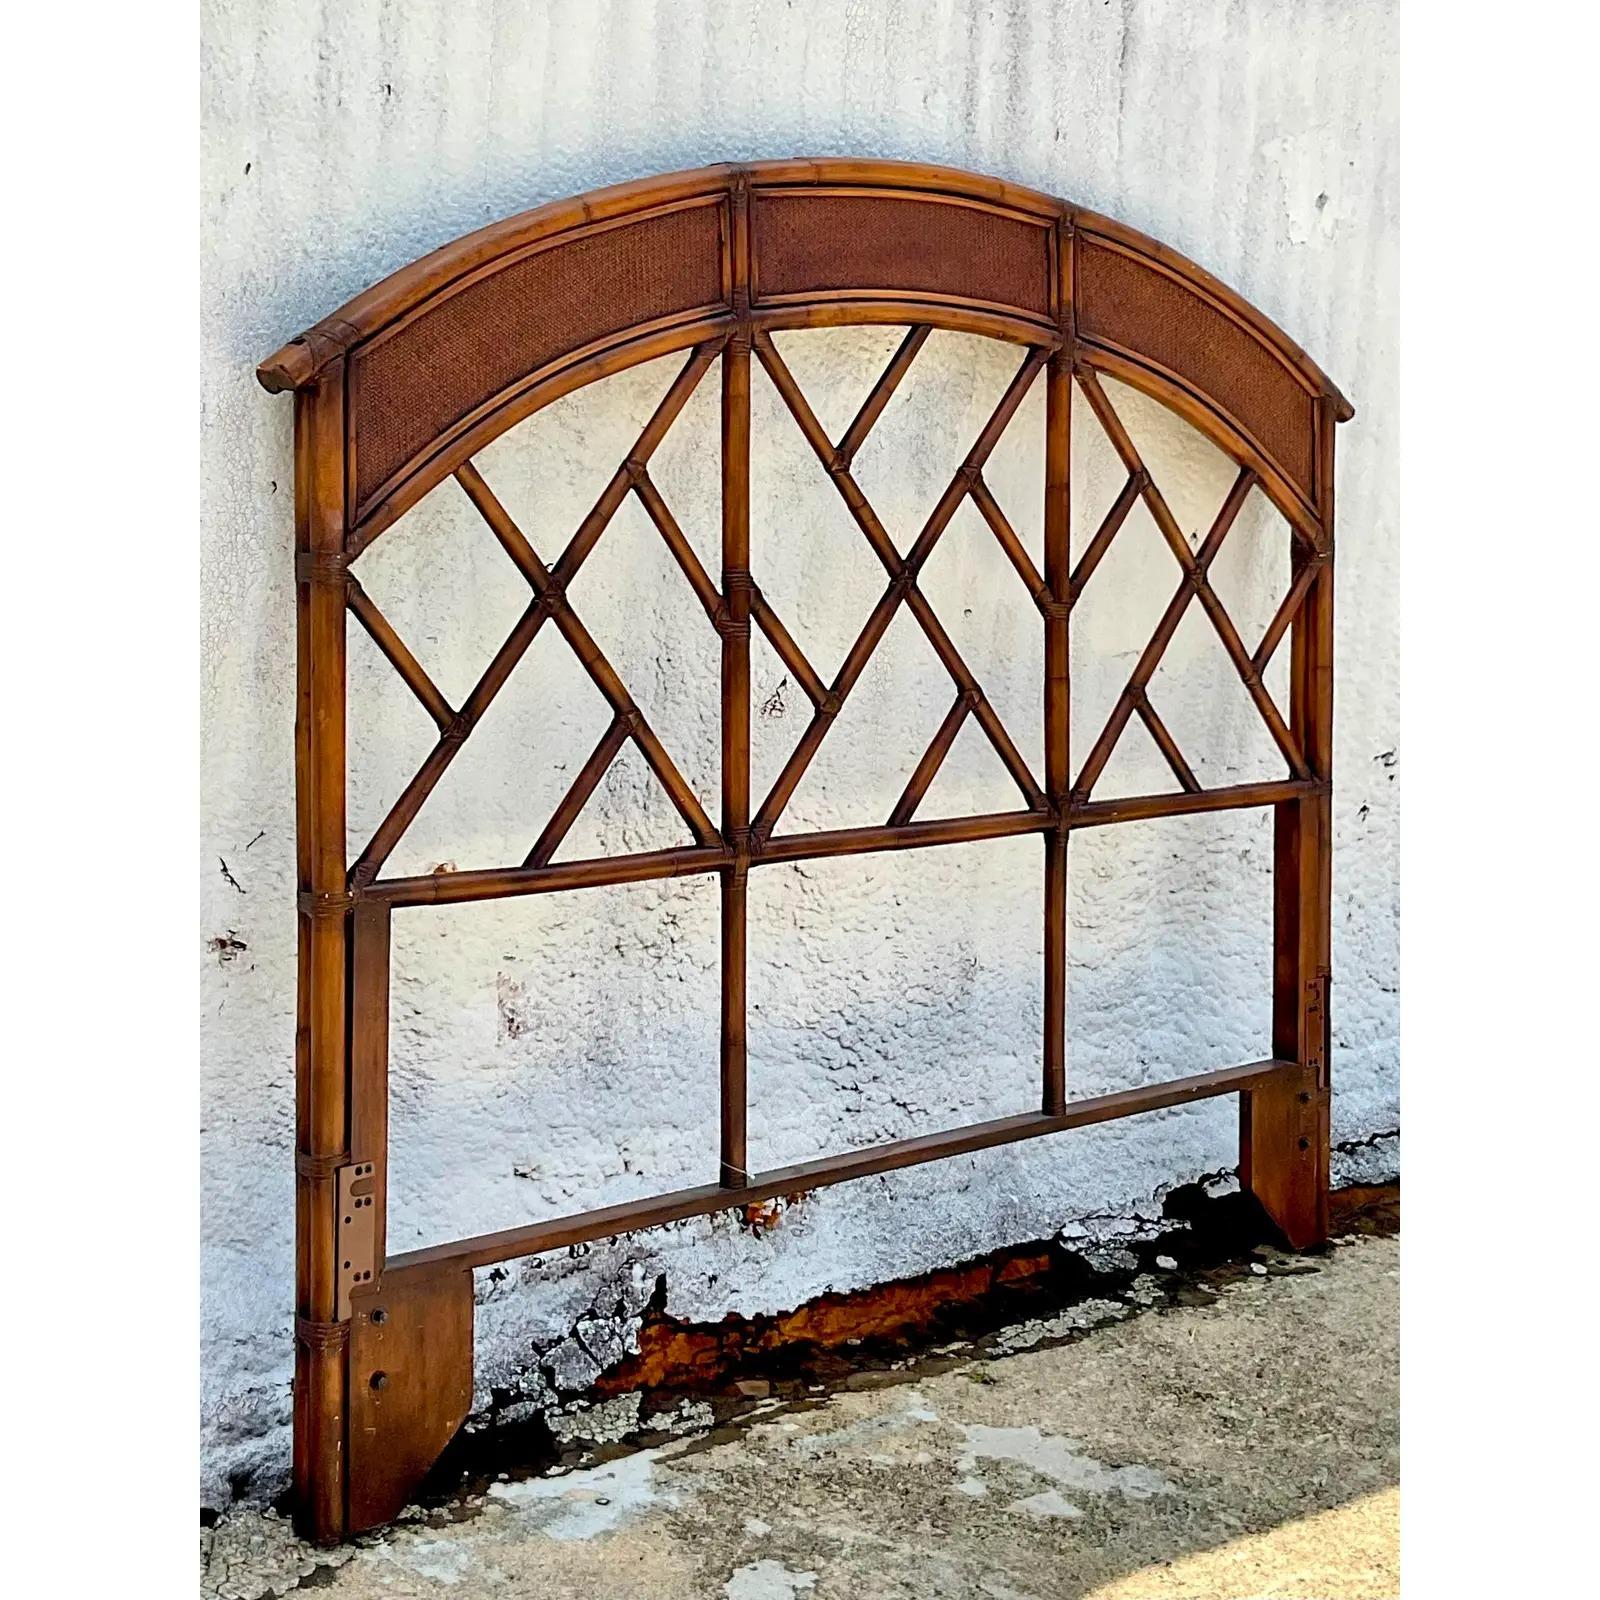 Fantastic vintage Queen headboard. Beautiful arched design with the coveted Chinese Chippendale motif. Inset woven rattan panels. Acquired from a Palm Beach estate.